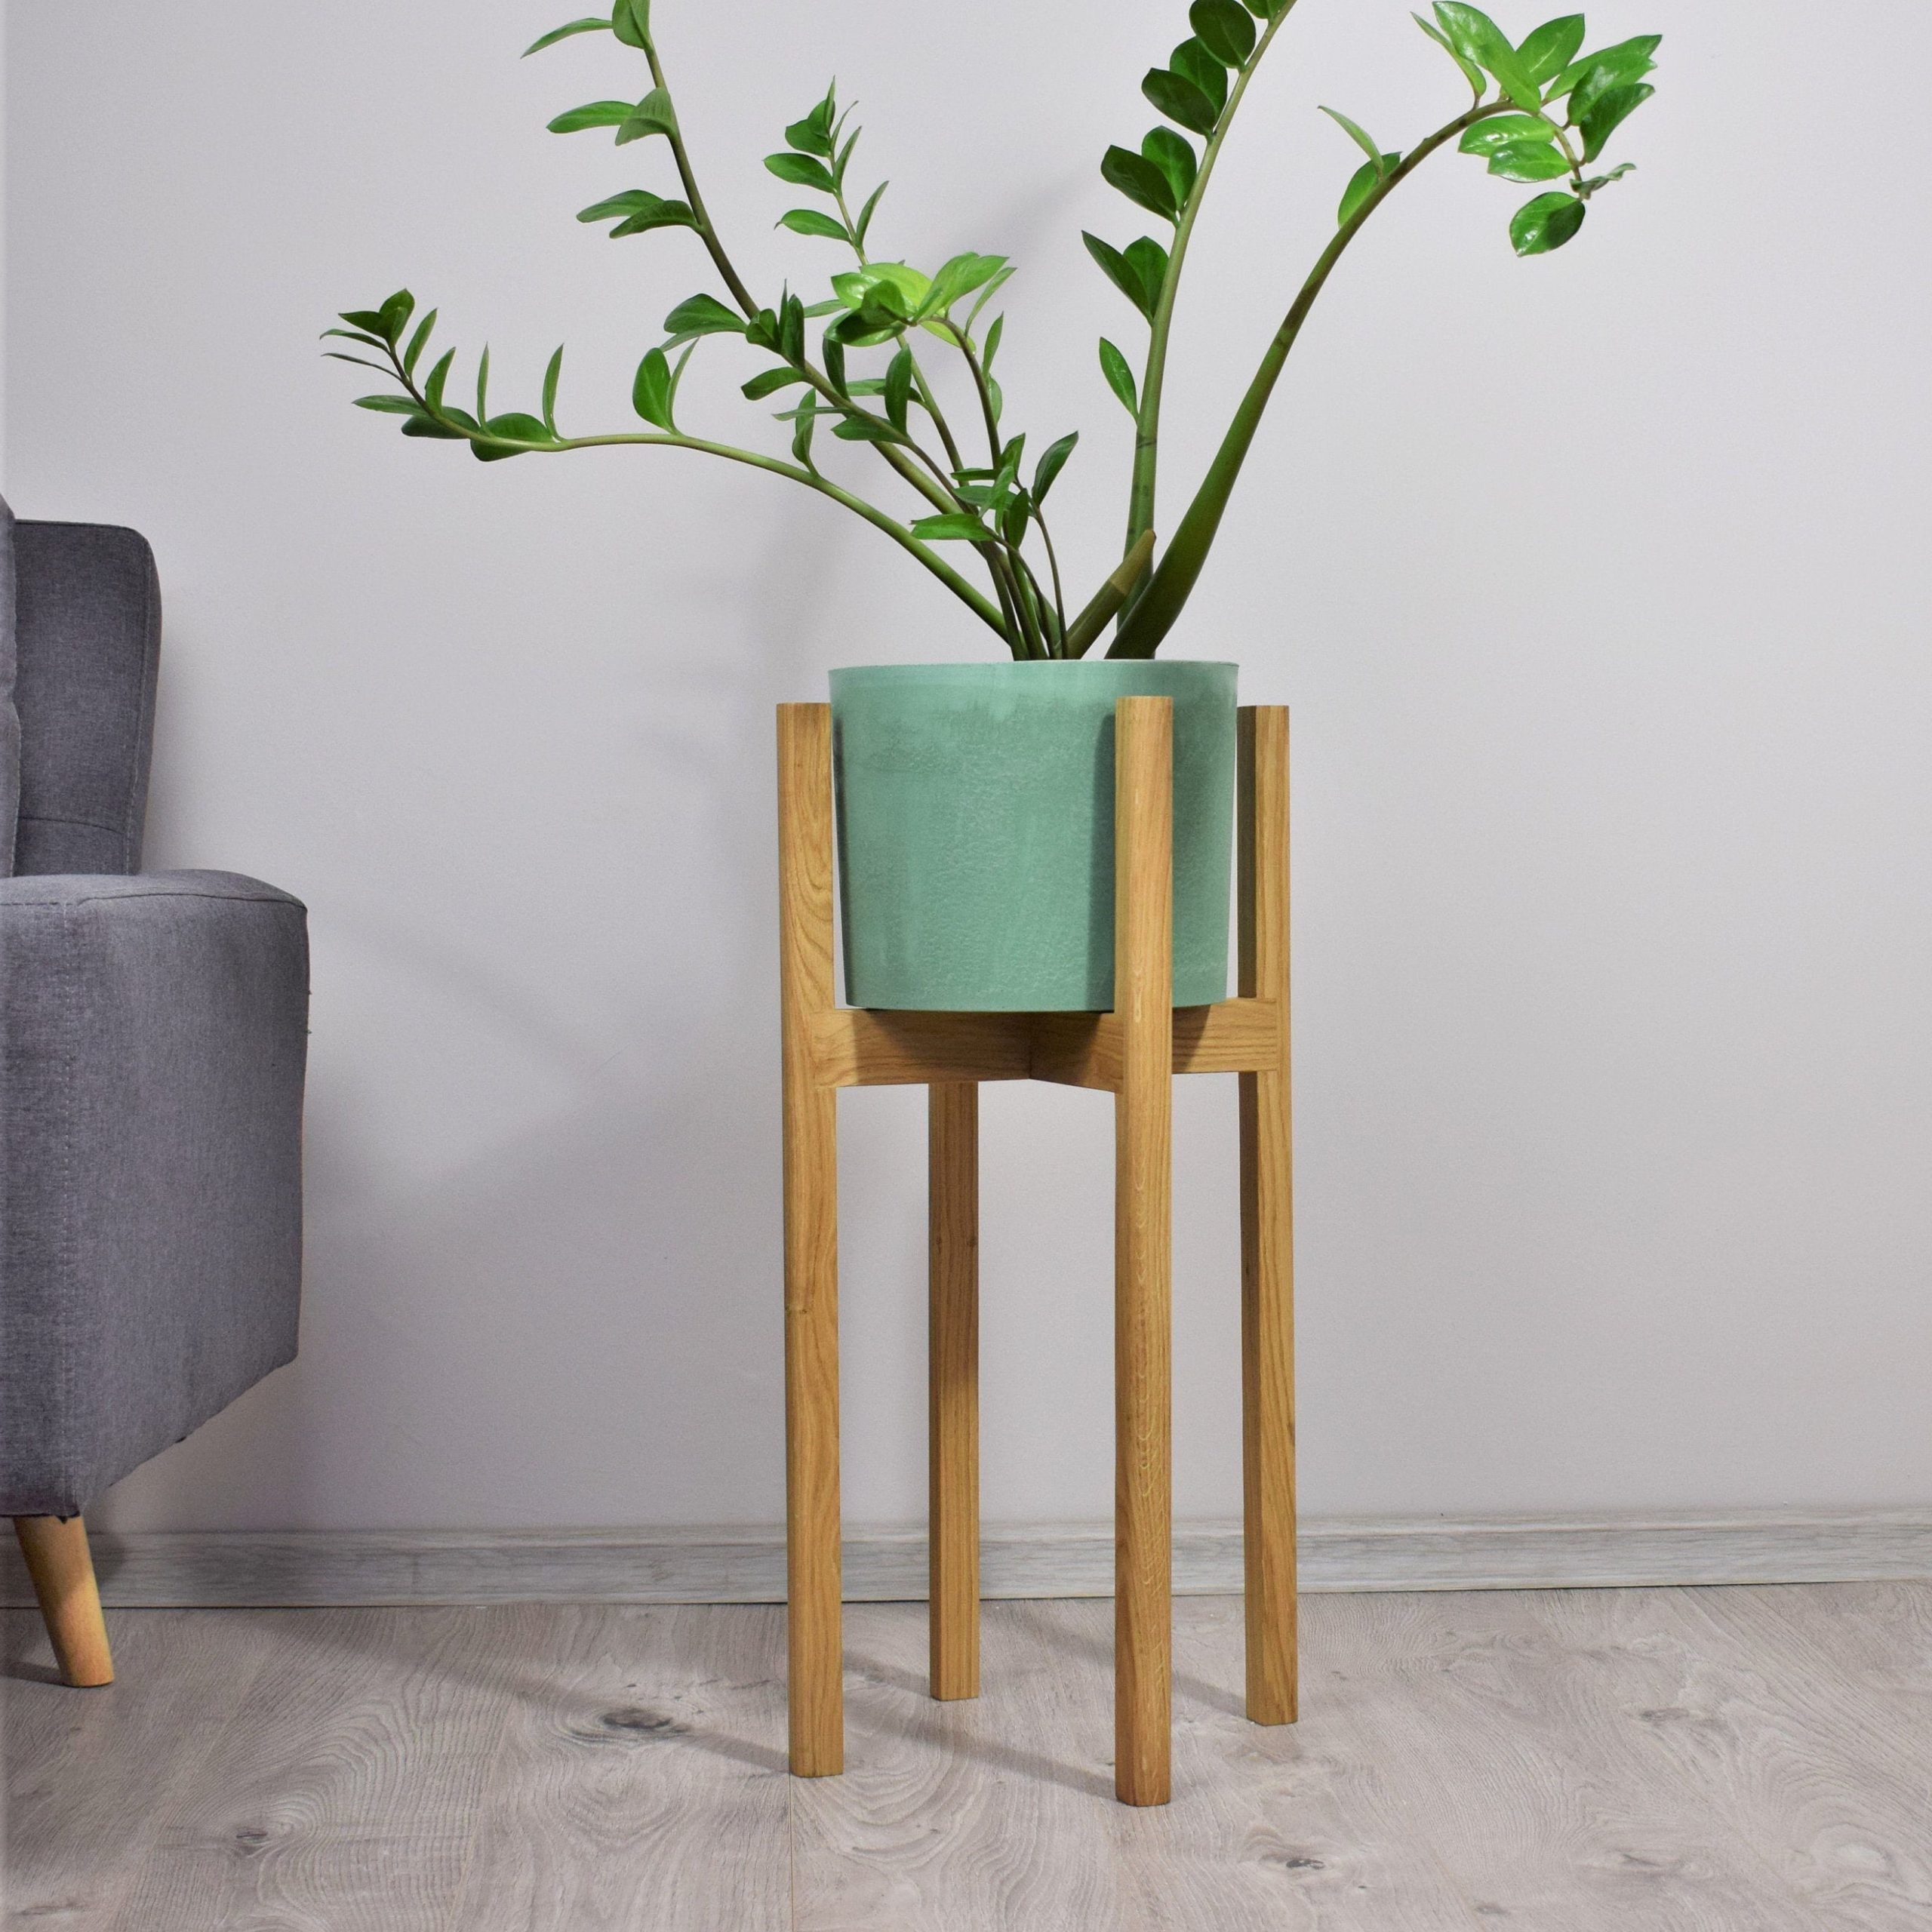 Best And Newest Oak Plant Stands Inside Tall Plant Stands Made Of Natural Oak Wood (View 3 of 15)